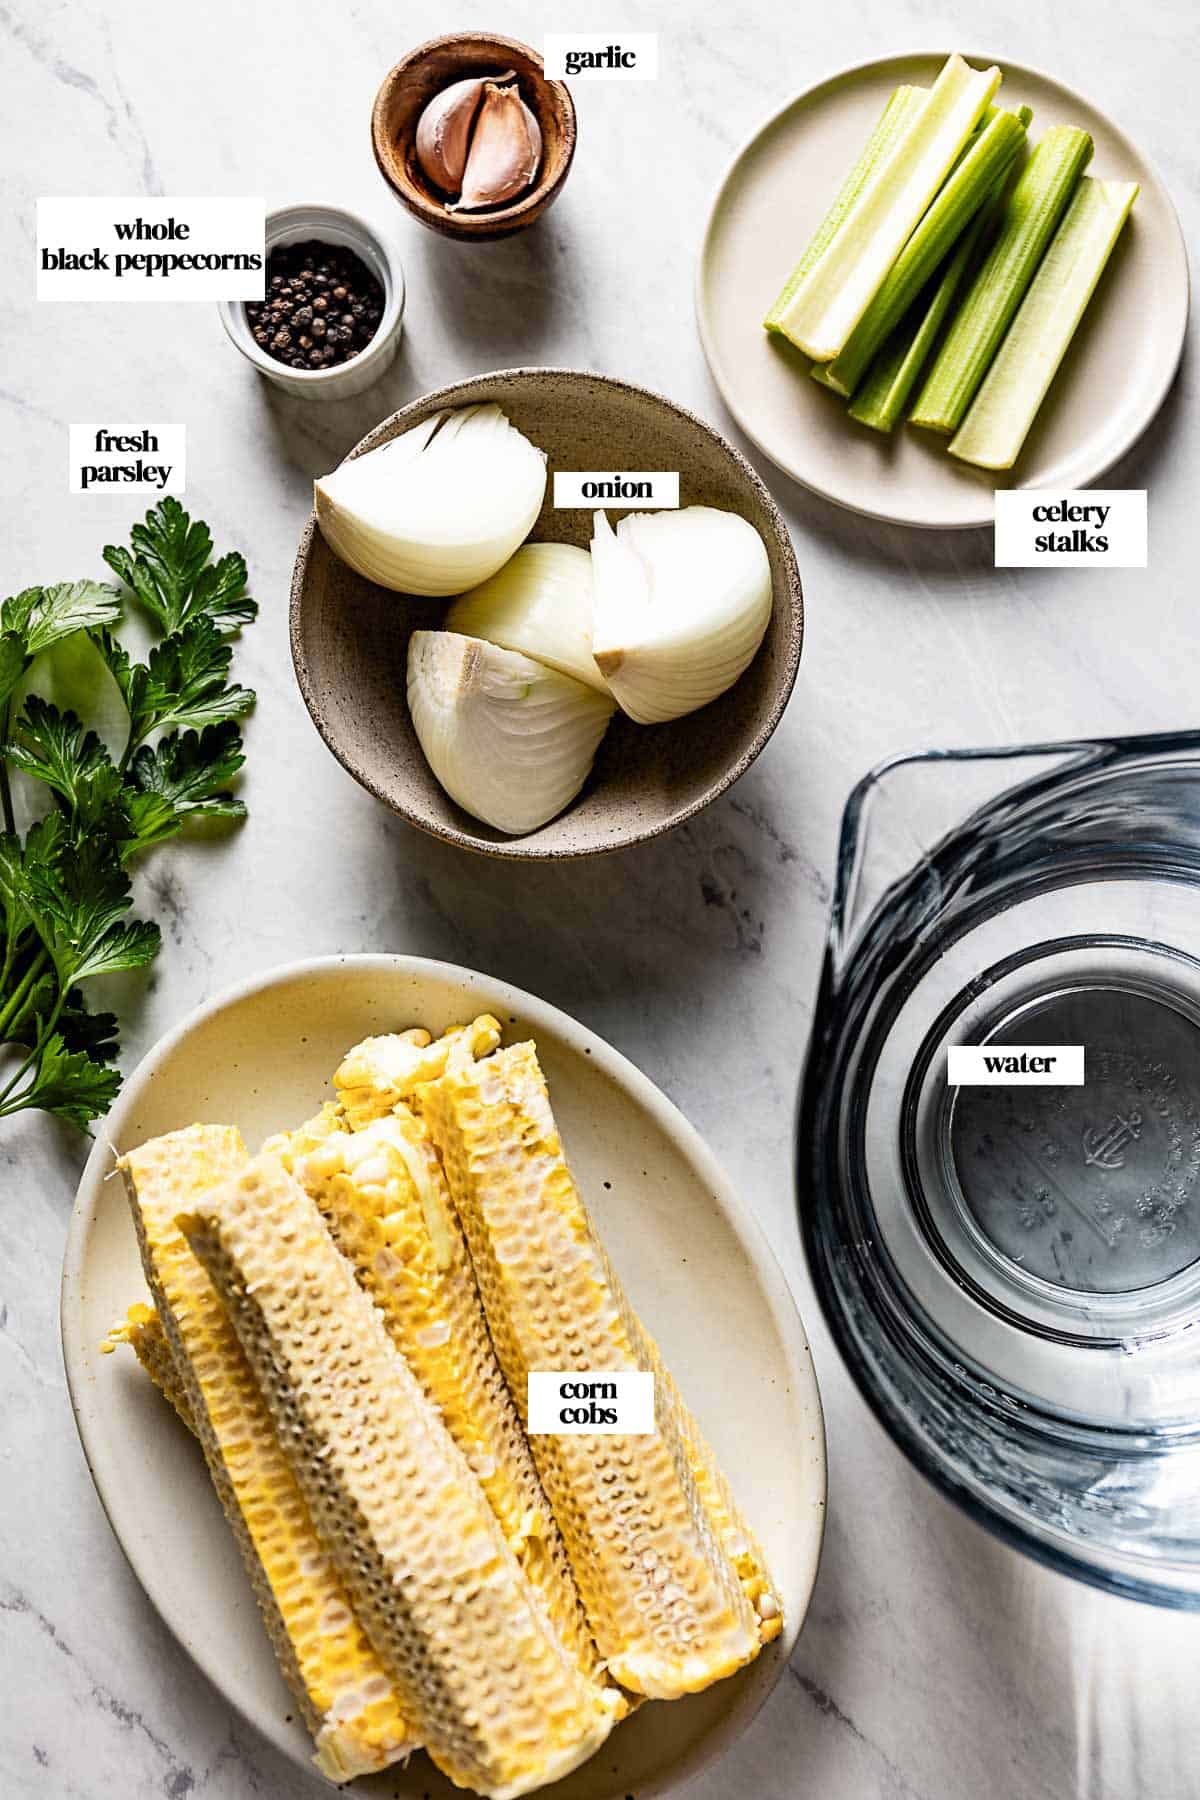 Ingredients for making corn broth from the top view with text on each ingredient.